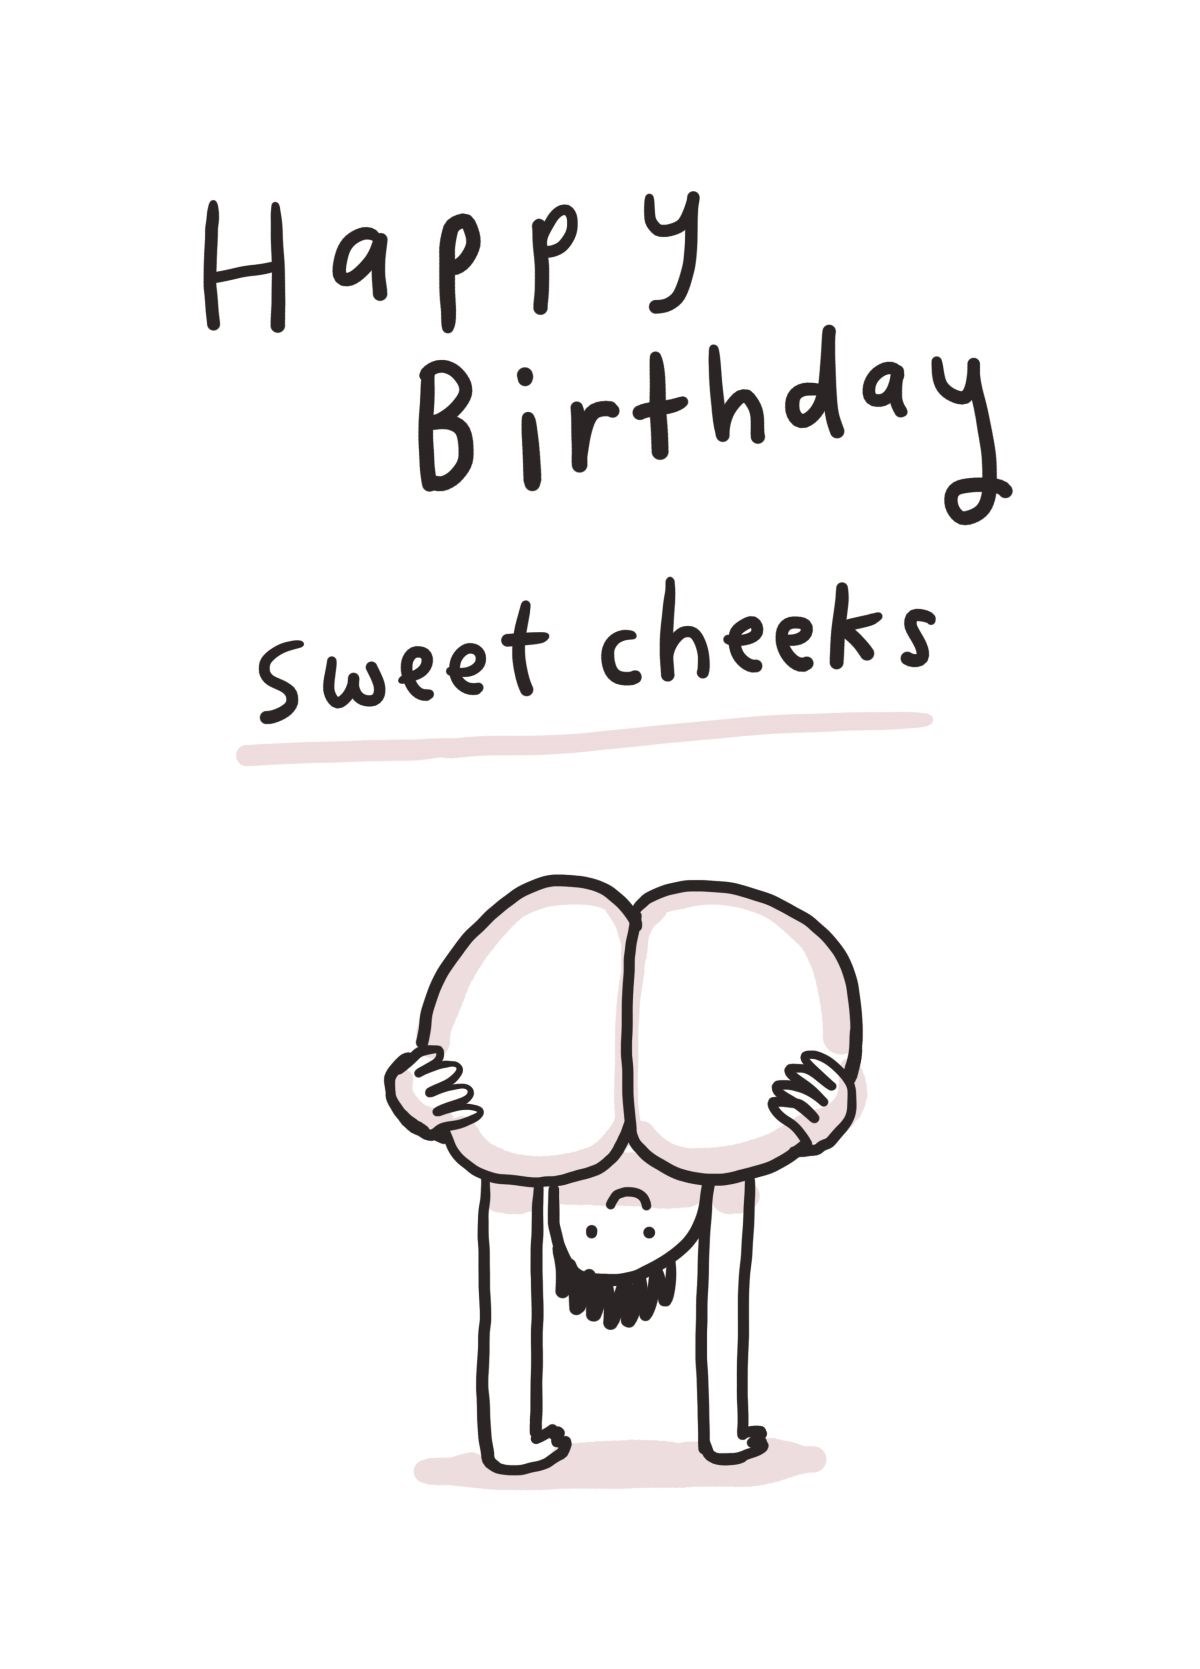 Rude and Cheeky Birthday Cards